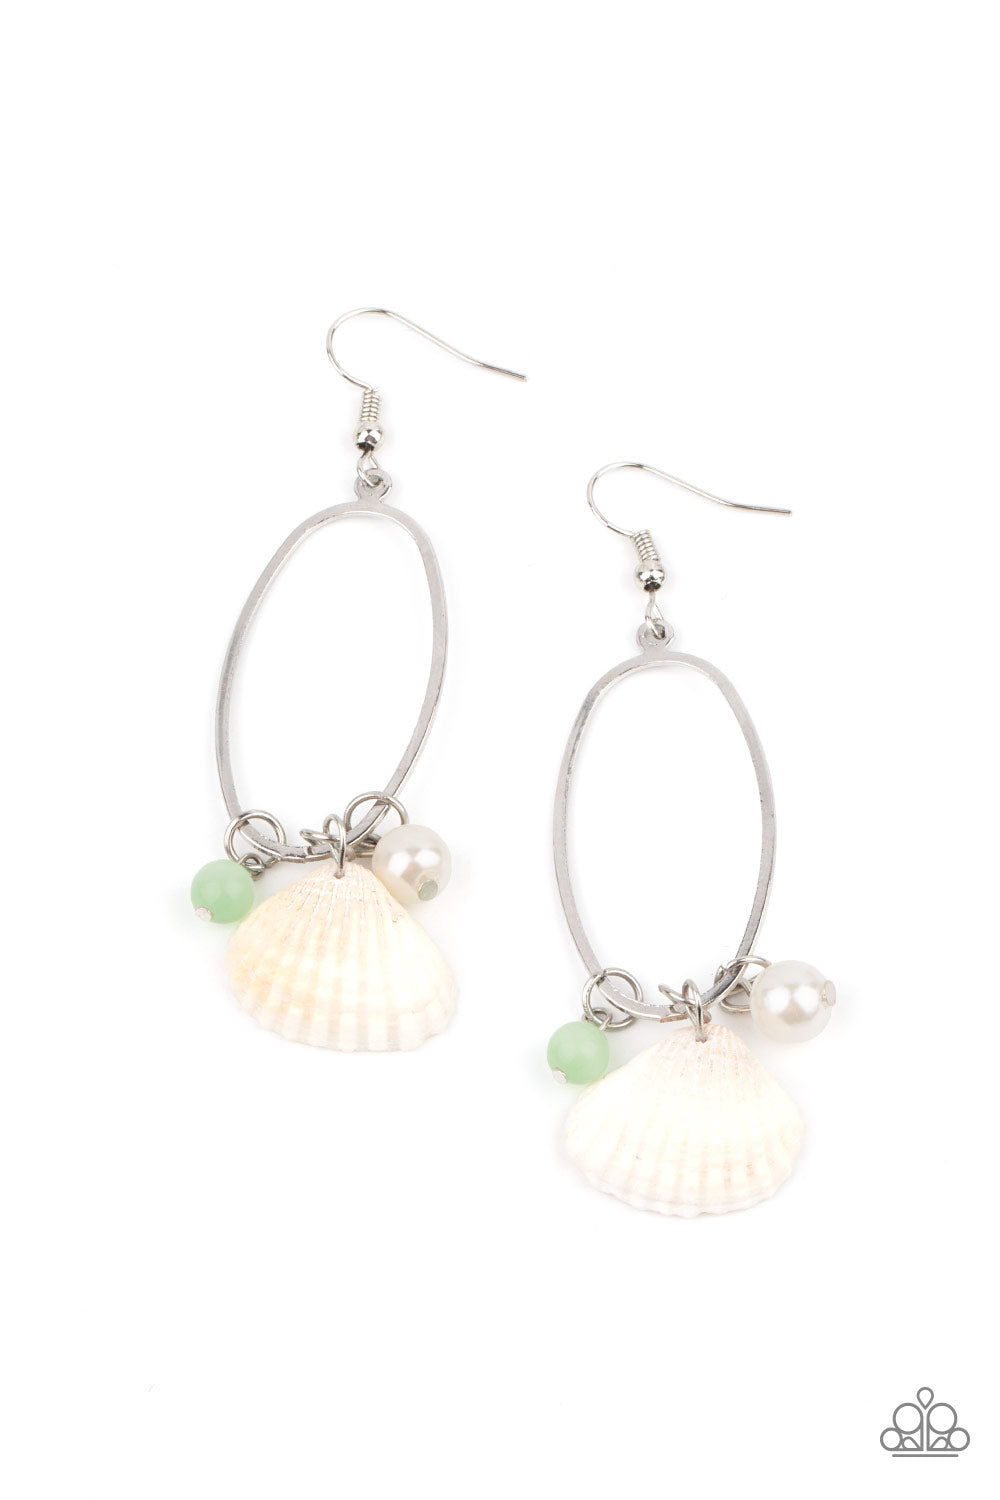 Paparazzi - This Too SHELL Pass - Green Earrings